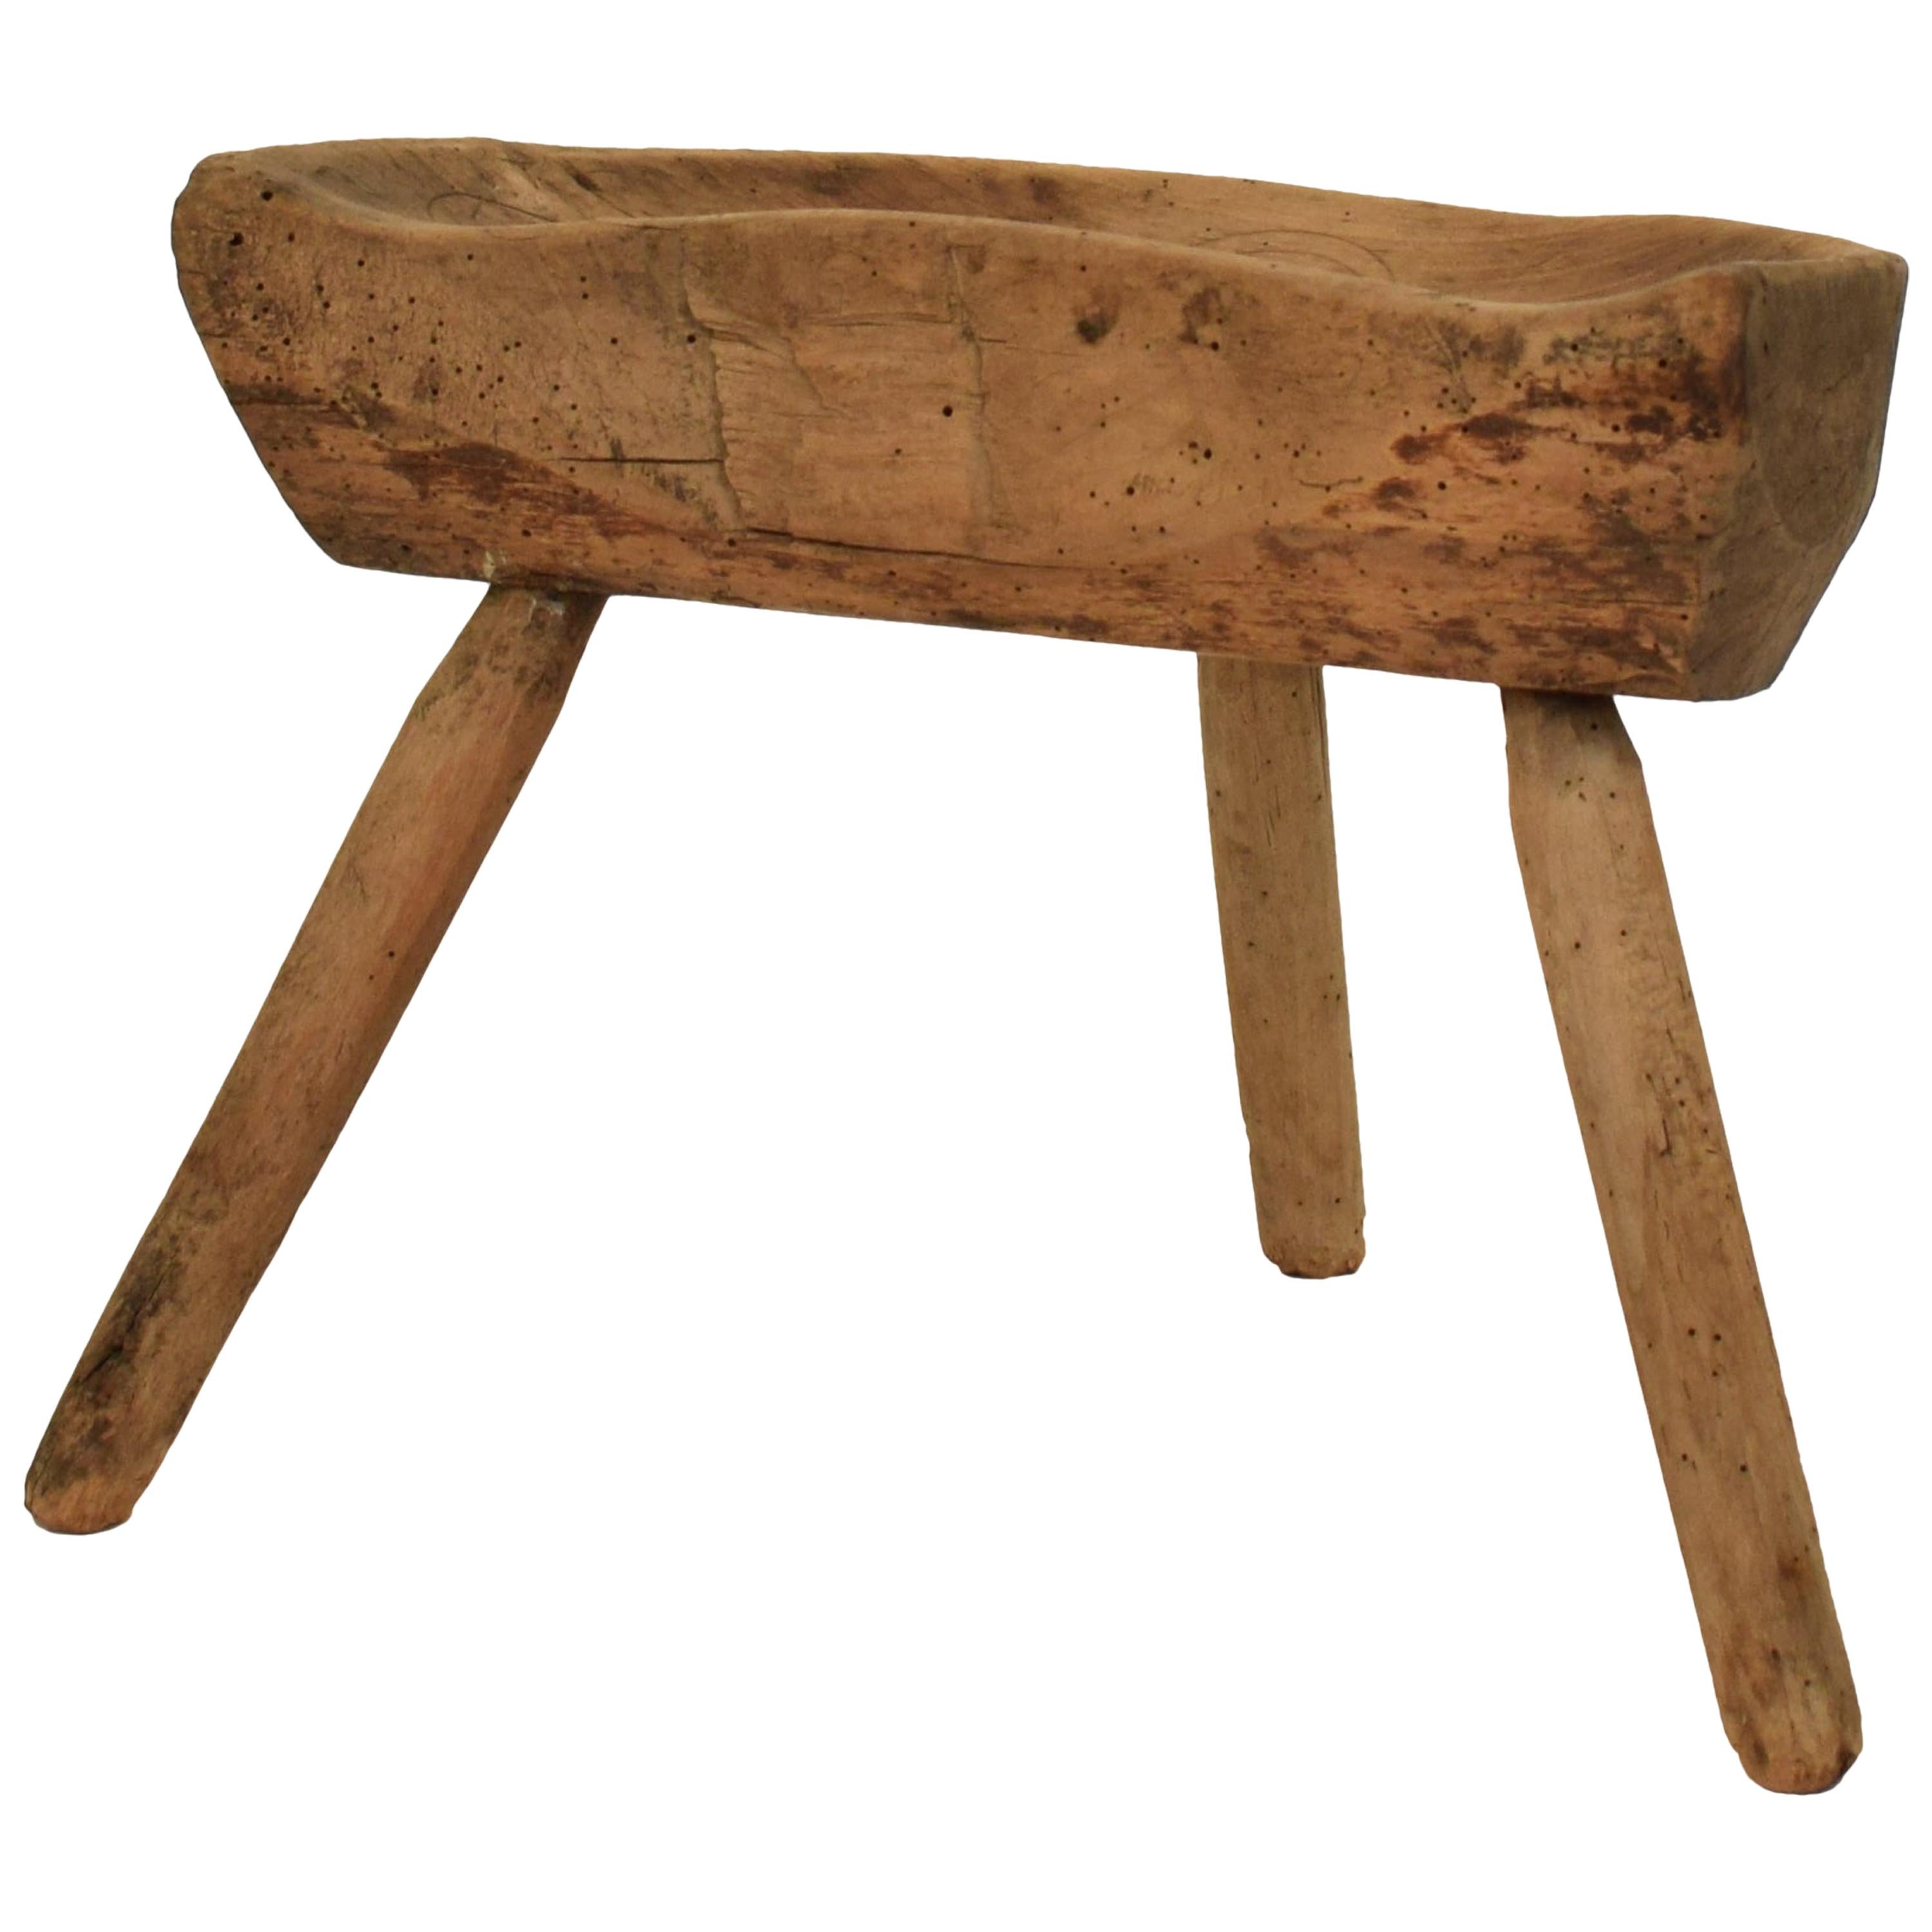 Early 19th Century Primitive Country Splayed Leg Cobbler Stool in Cherry Wood